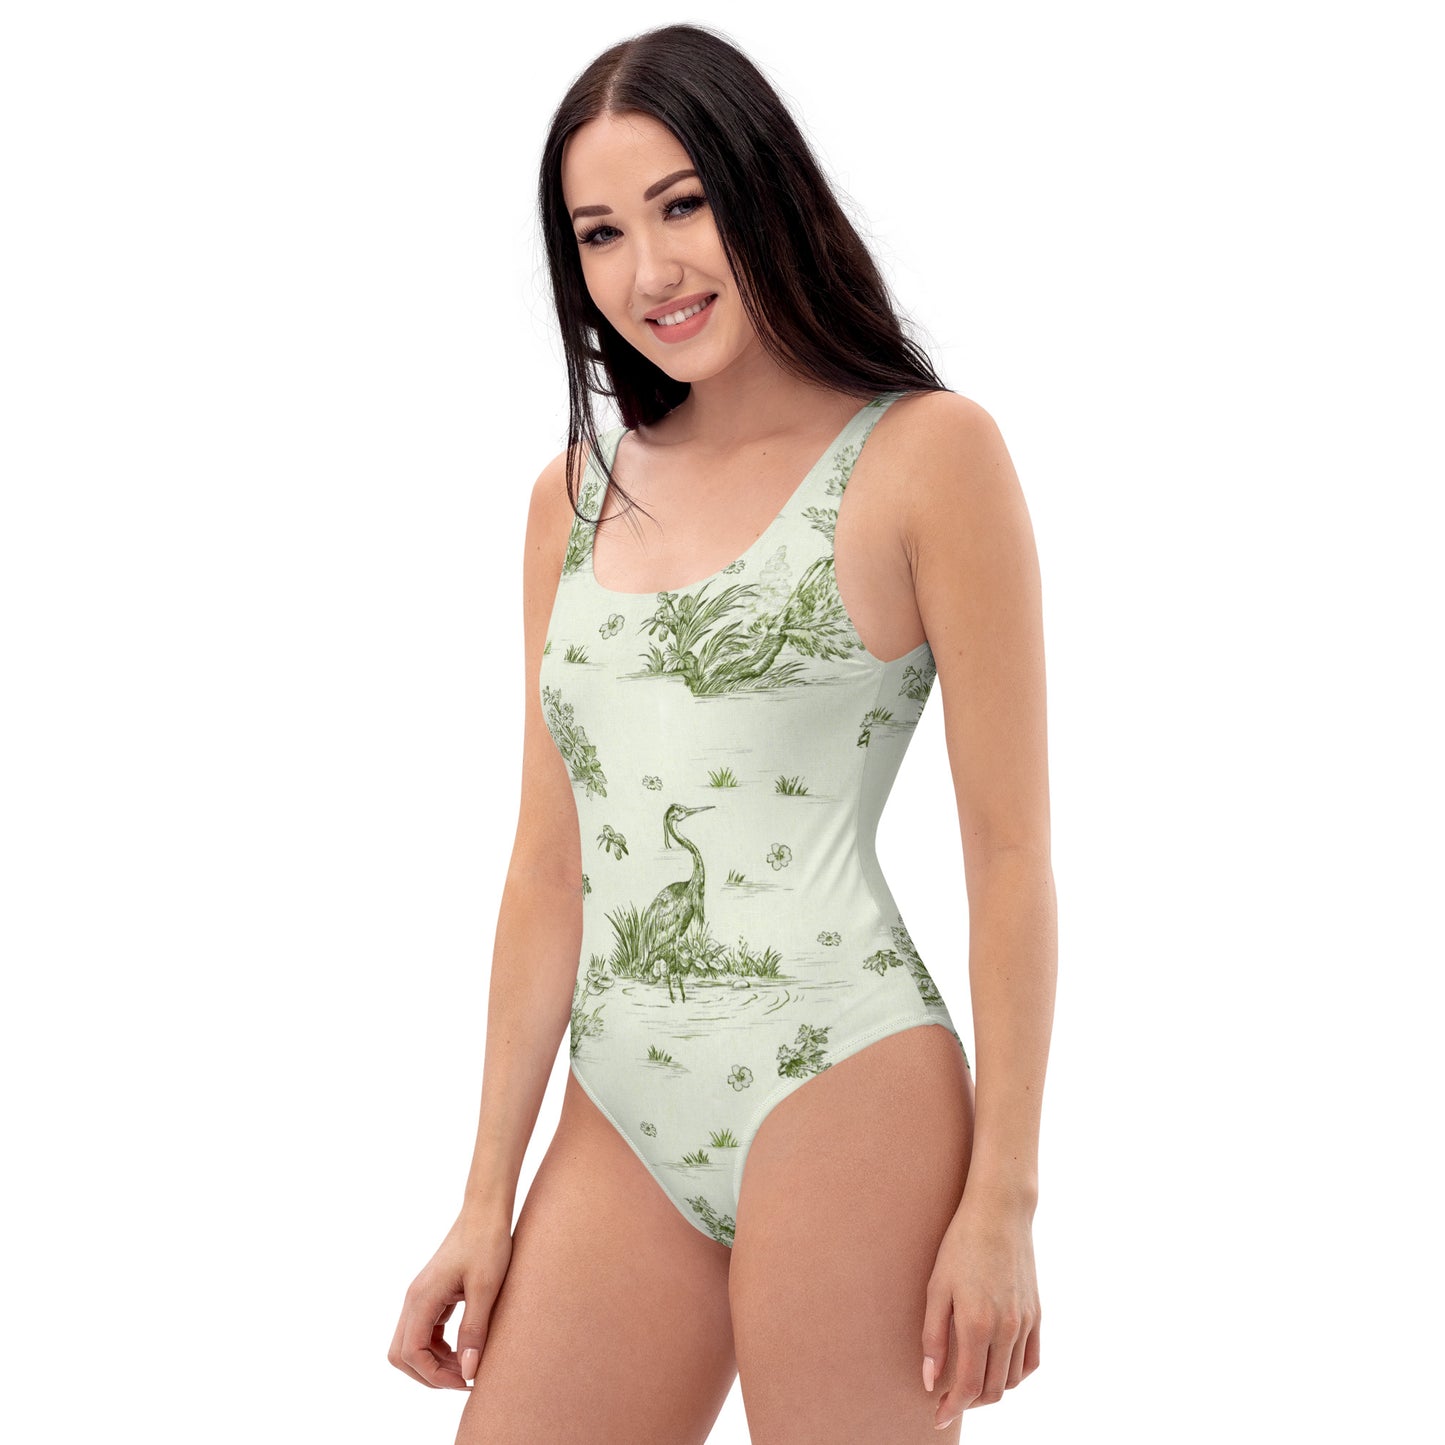 Toiles de Jouy tree Hugging Forest Green One-Piece Swimsuit